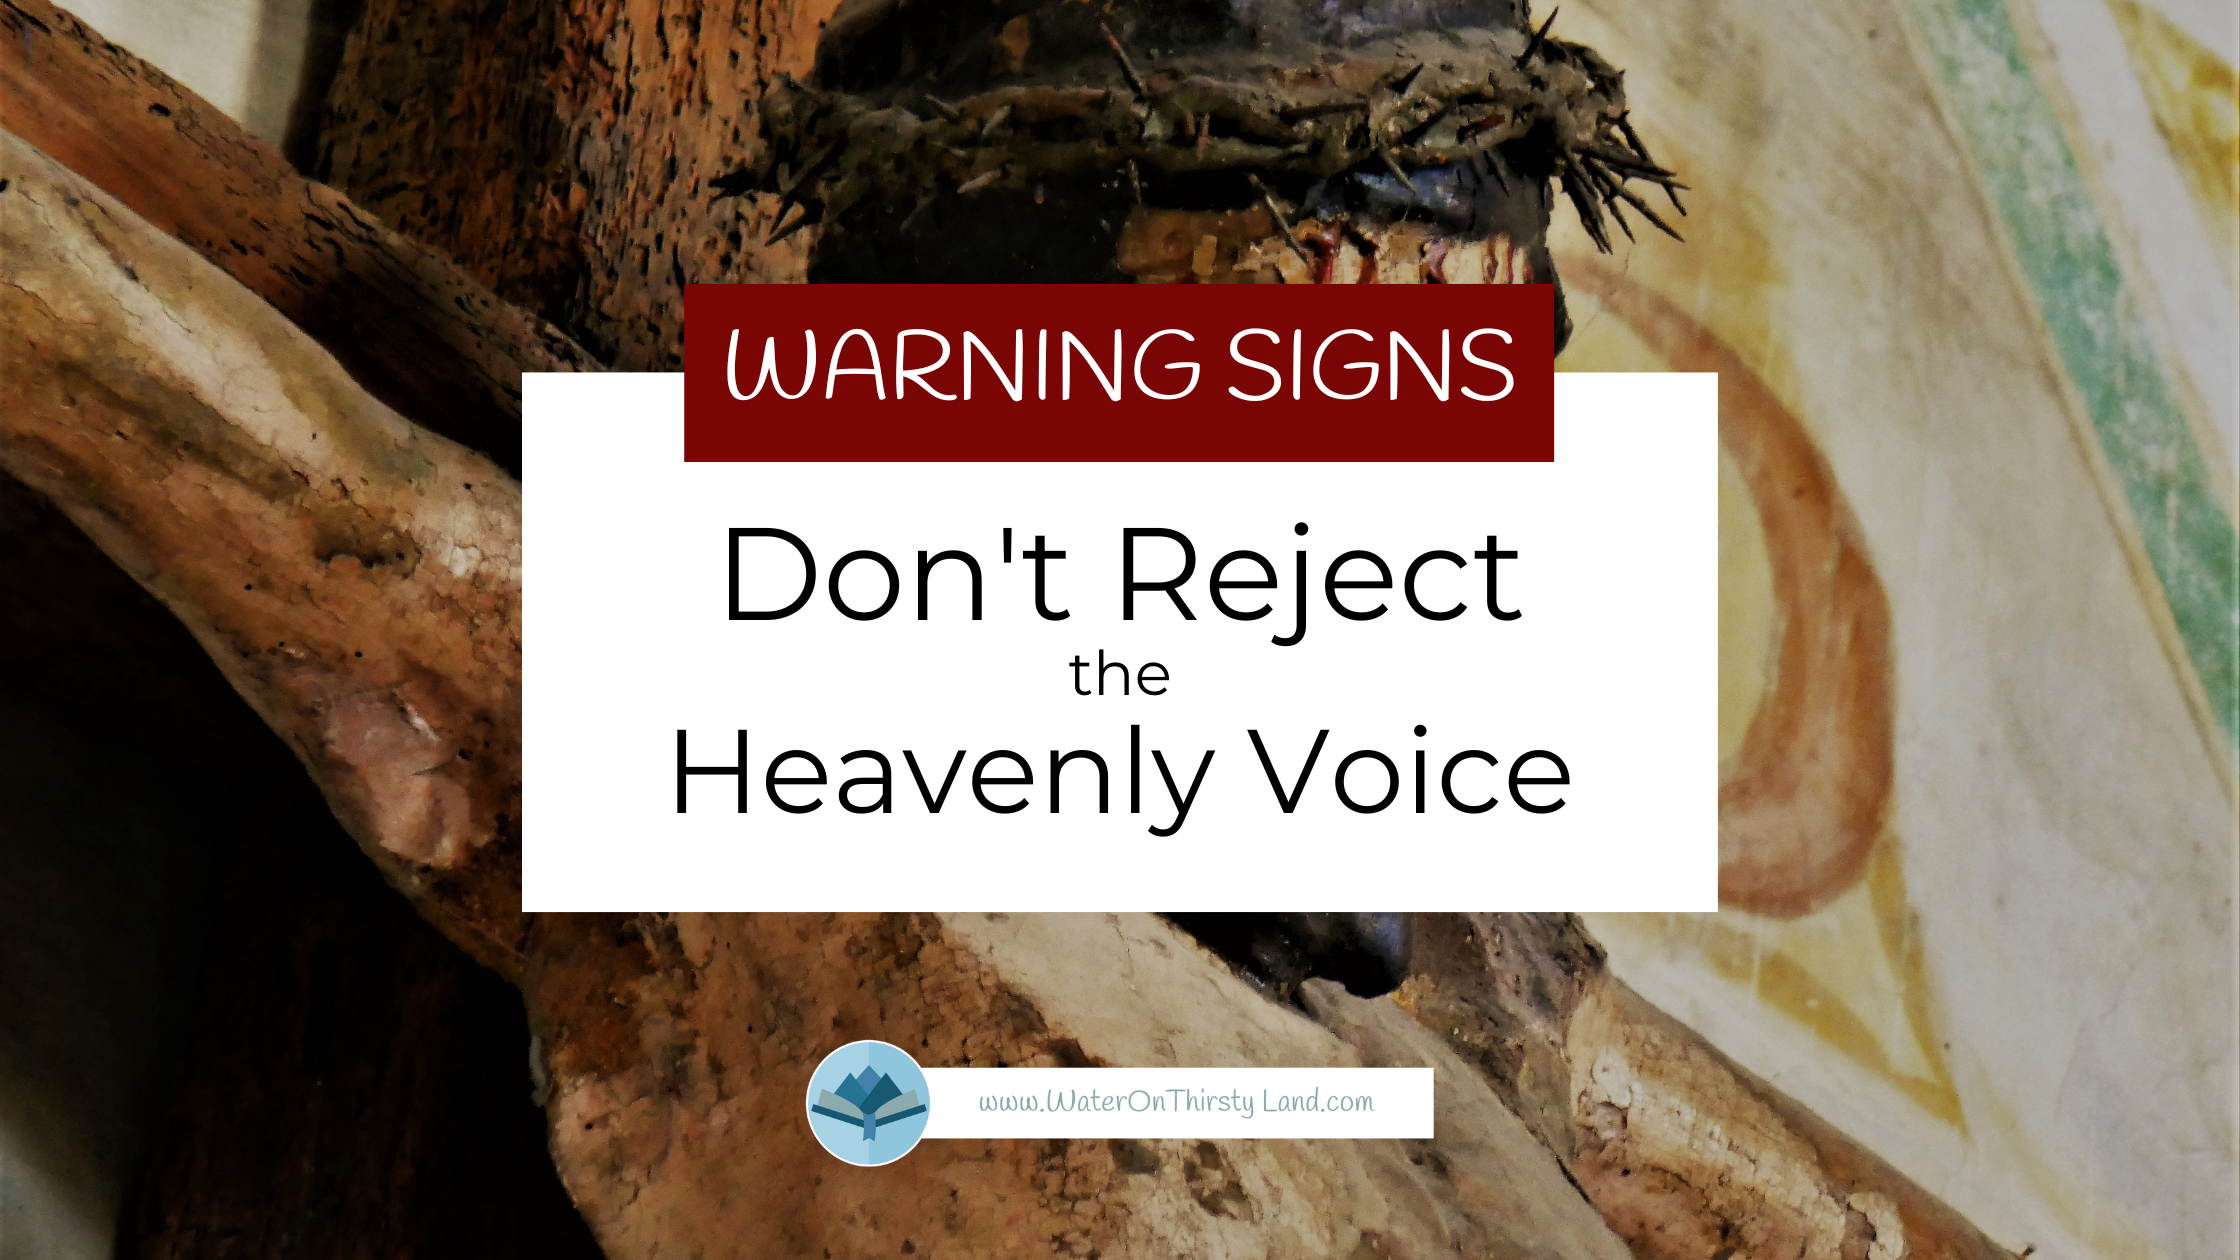 Don't Reject the Heavenly Voice